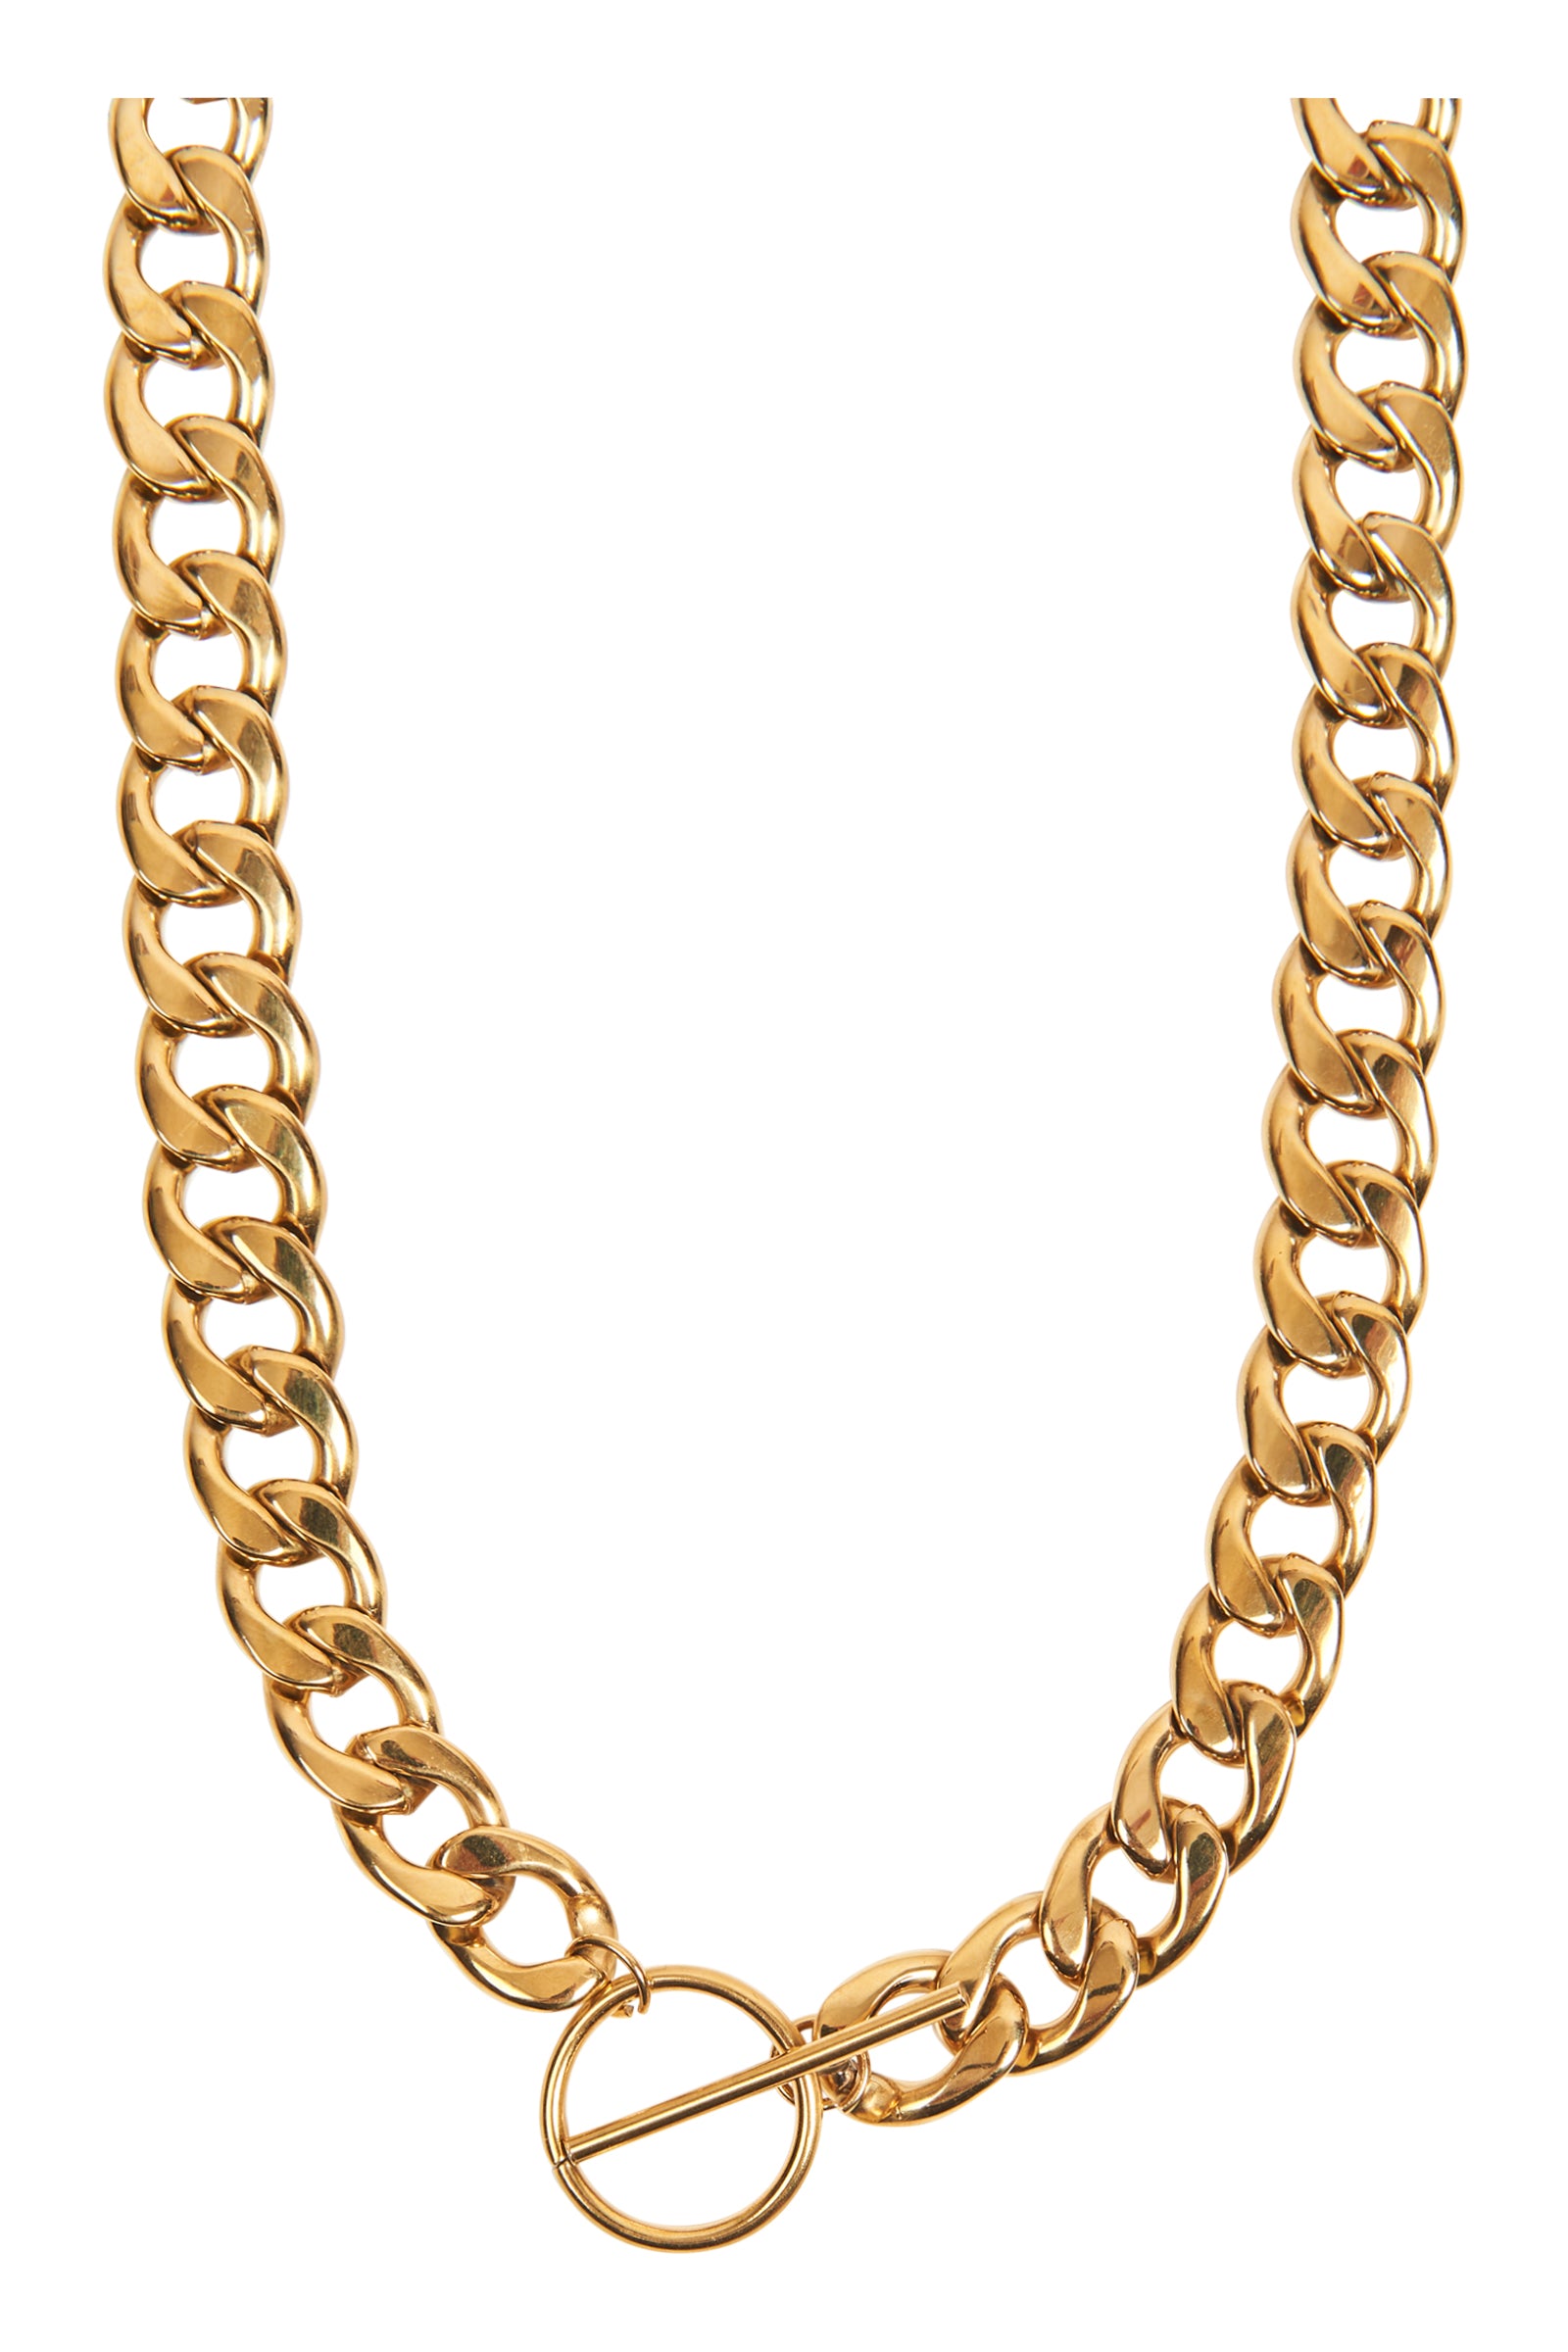 Meta Chain Necklace - Gold - eb&ive Necklace